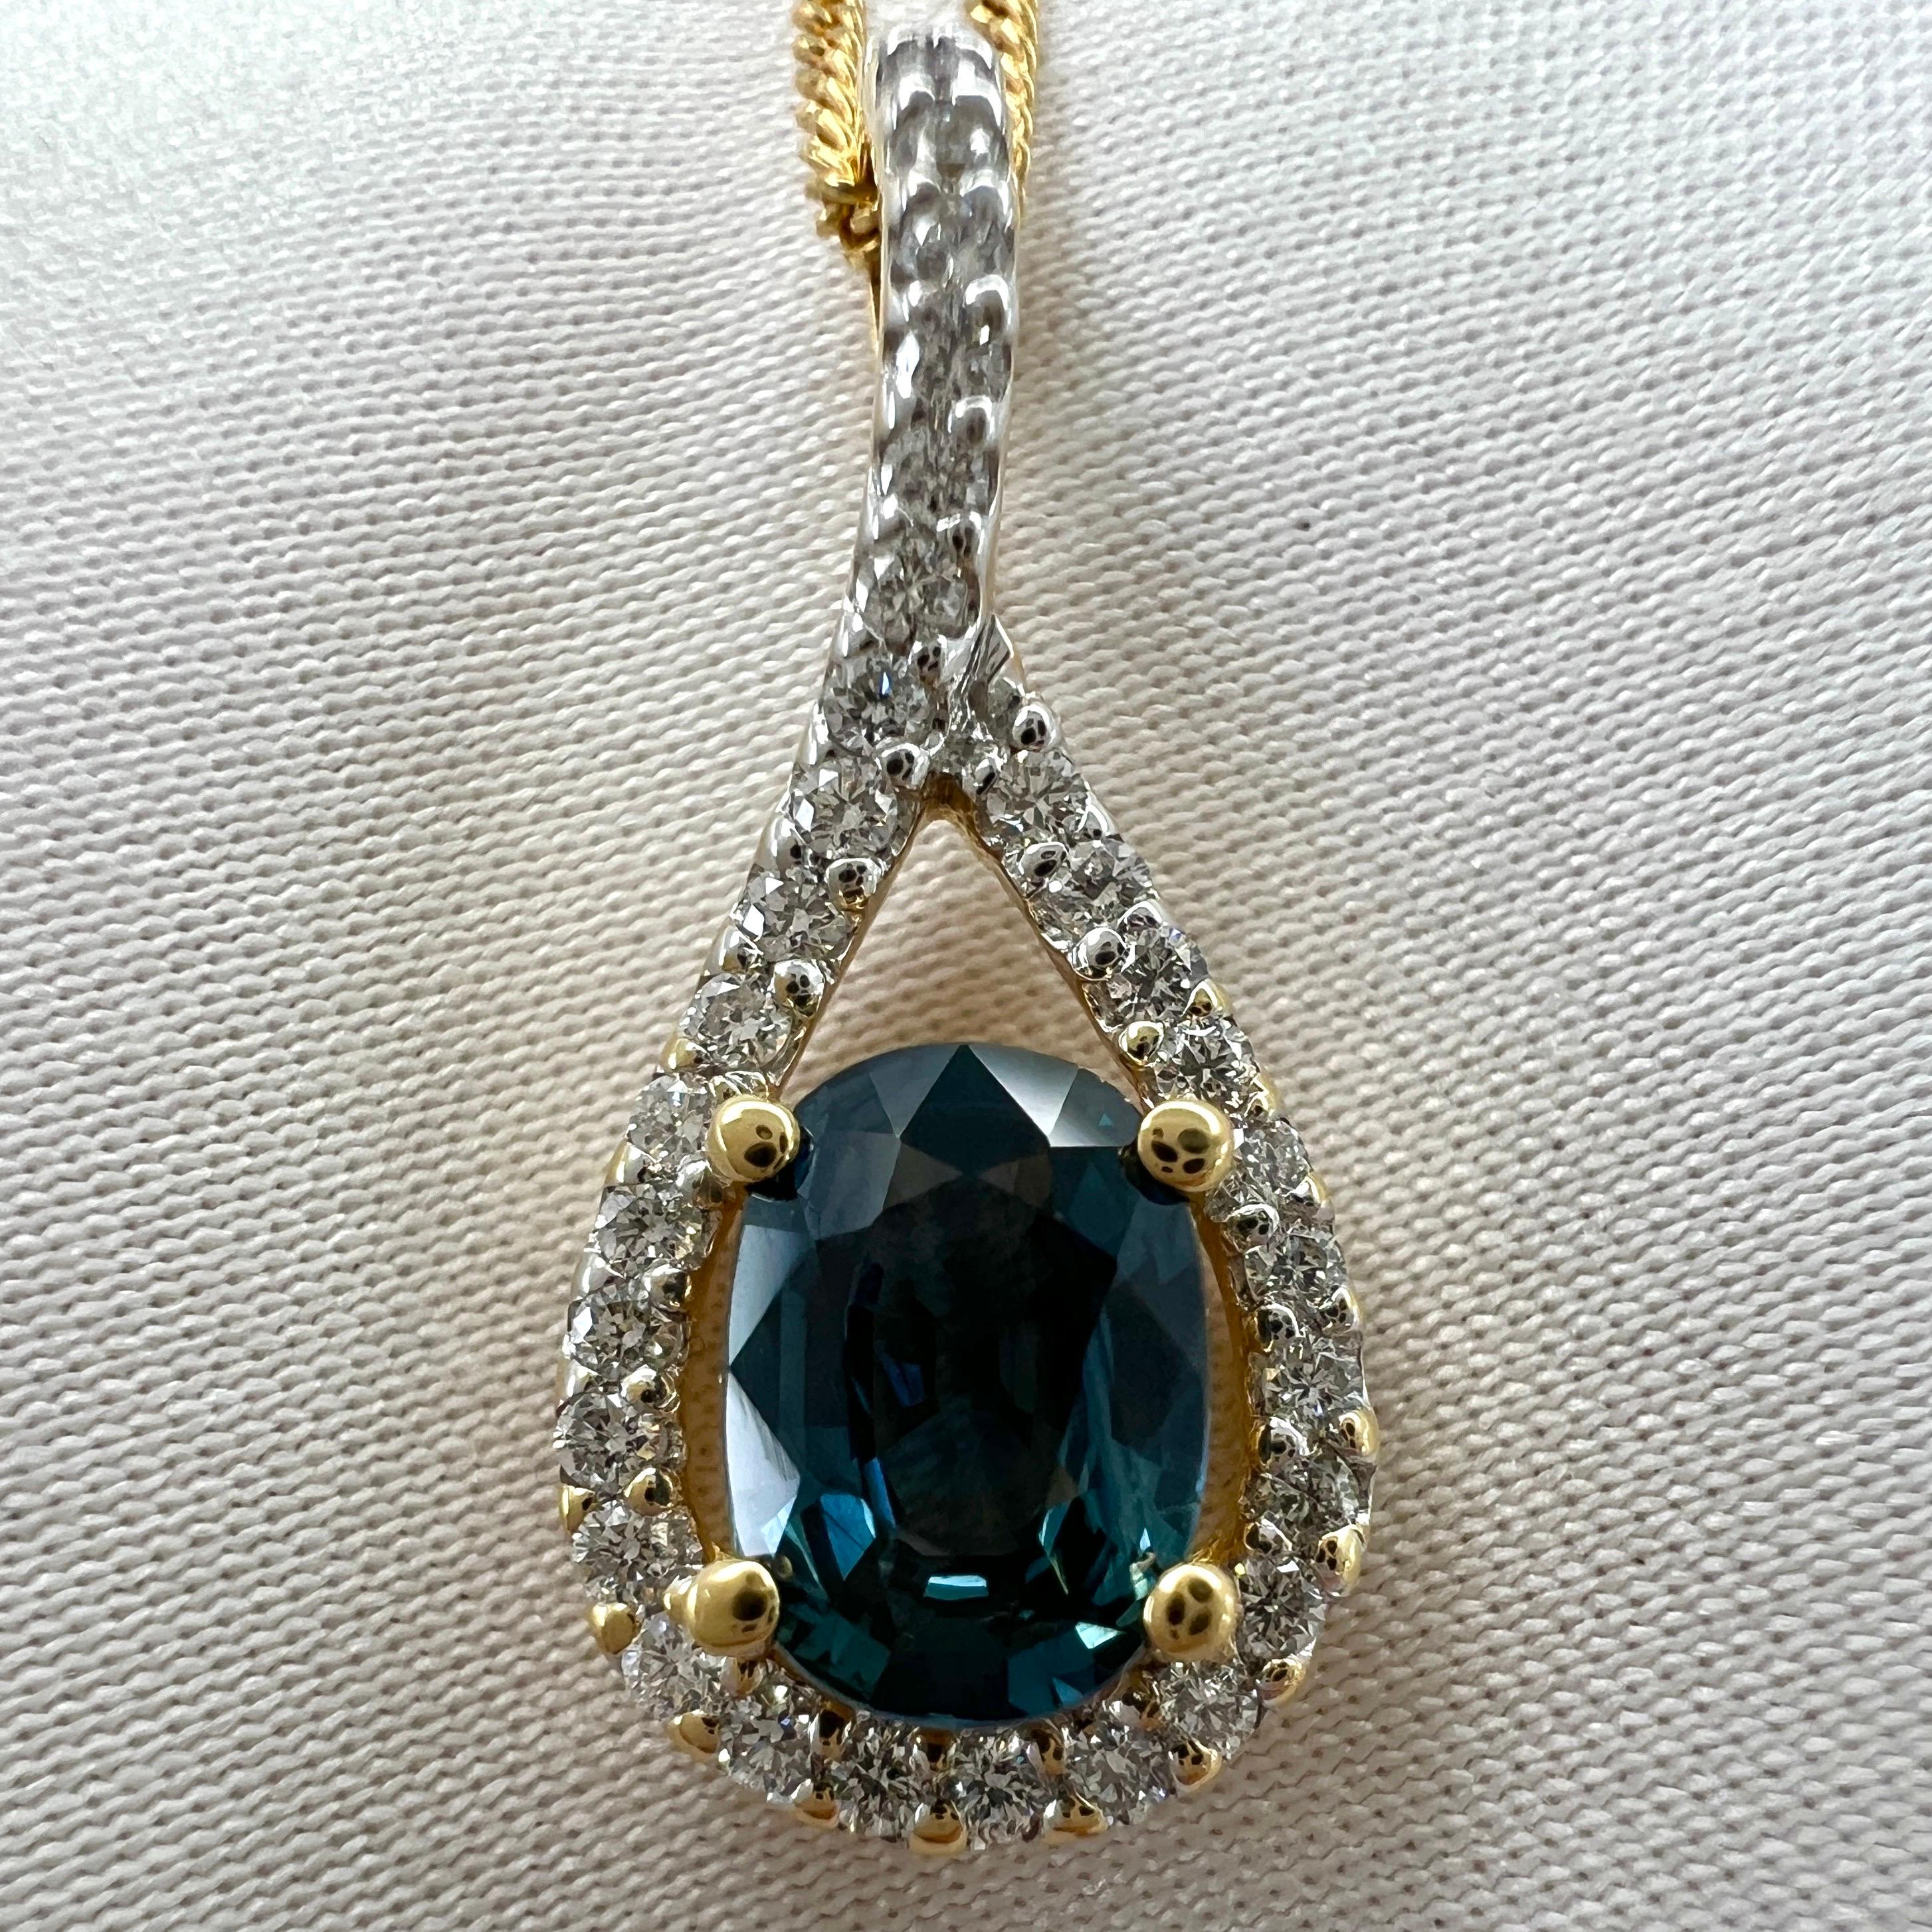 Deep Blue Sapphire & Diamond 18k Yellow & White Gold Crossover Pendant.

1.00 Carat sapphire with a beautiful deep blue colour and very good clarity. Clean stone with only some small natural inclusions visible when looking closely. Also has an